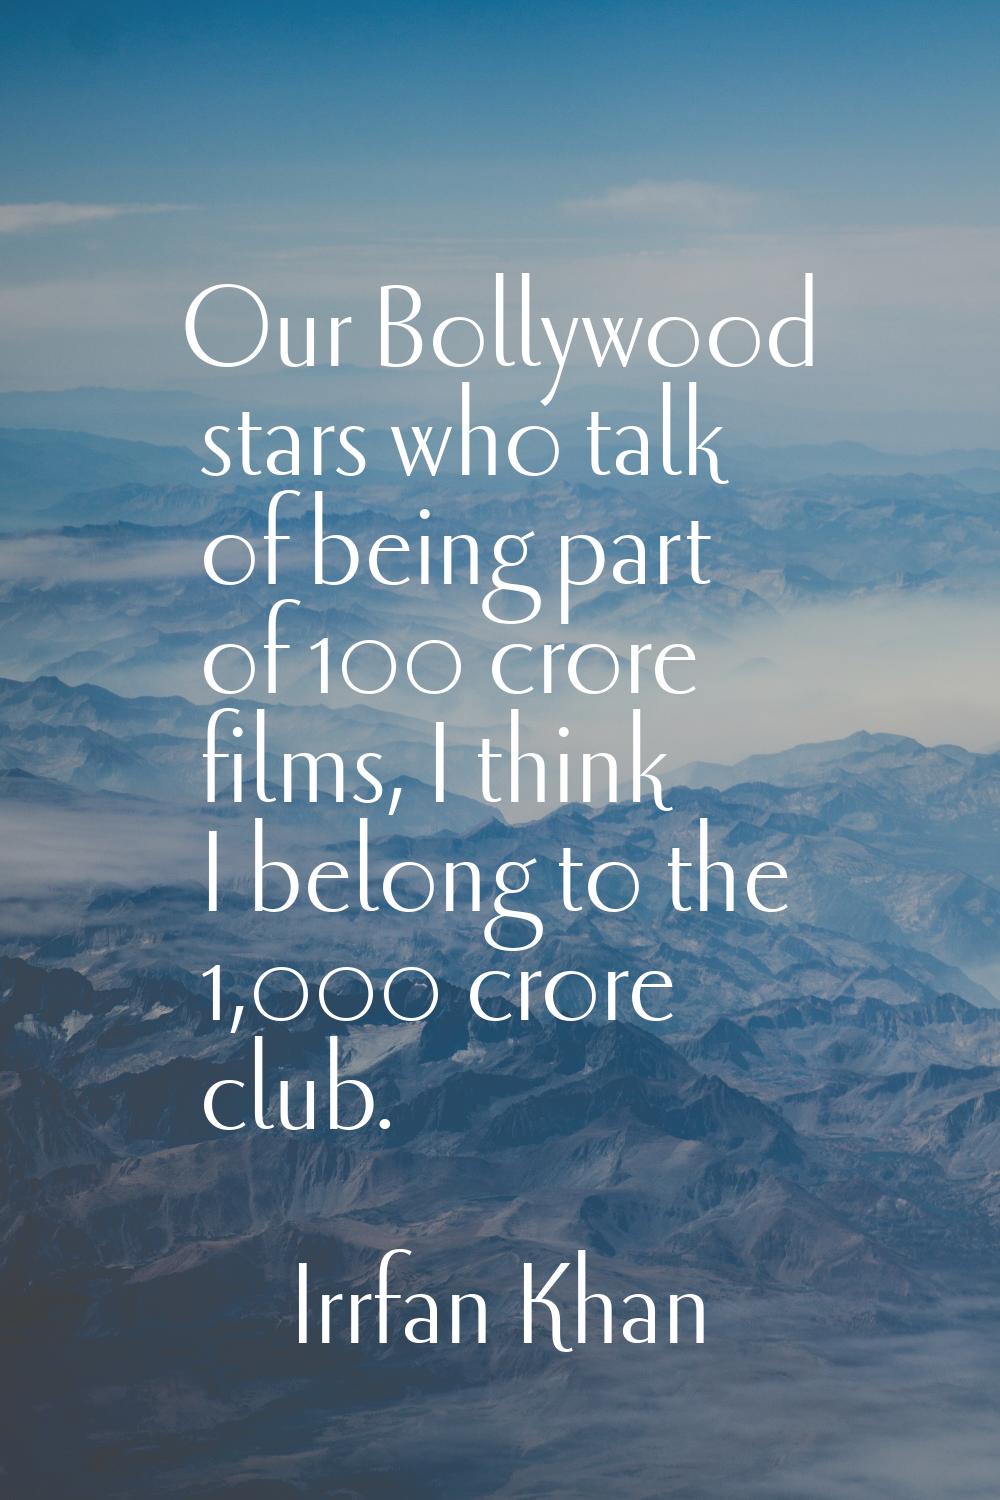 Our Bollywood stars who talk of being part of 100 crore films, I think I belong to the 1,000 crore 